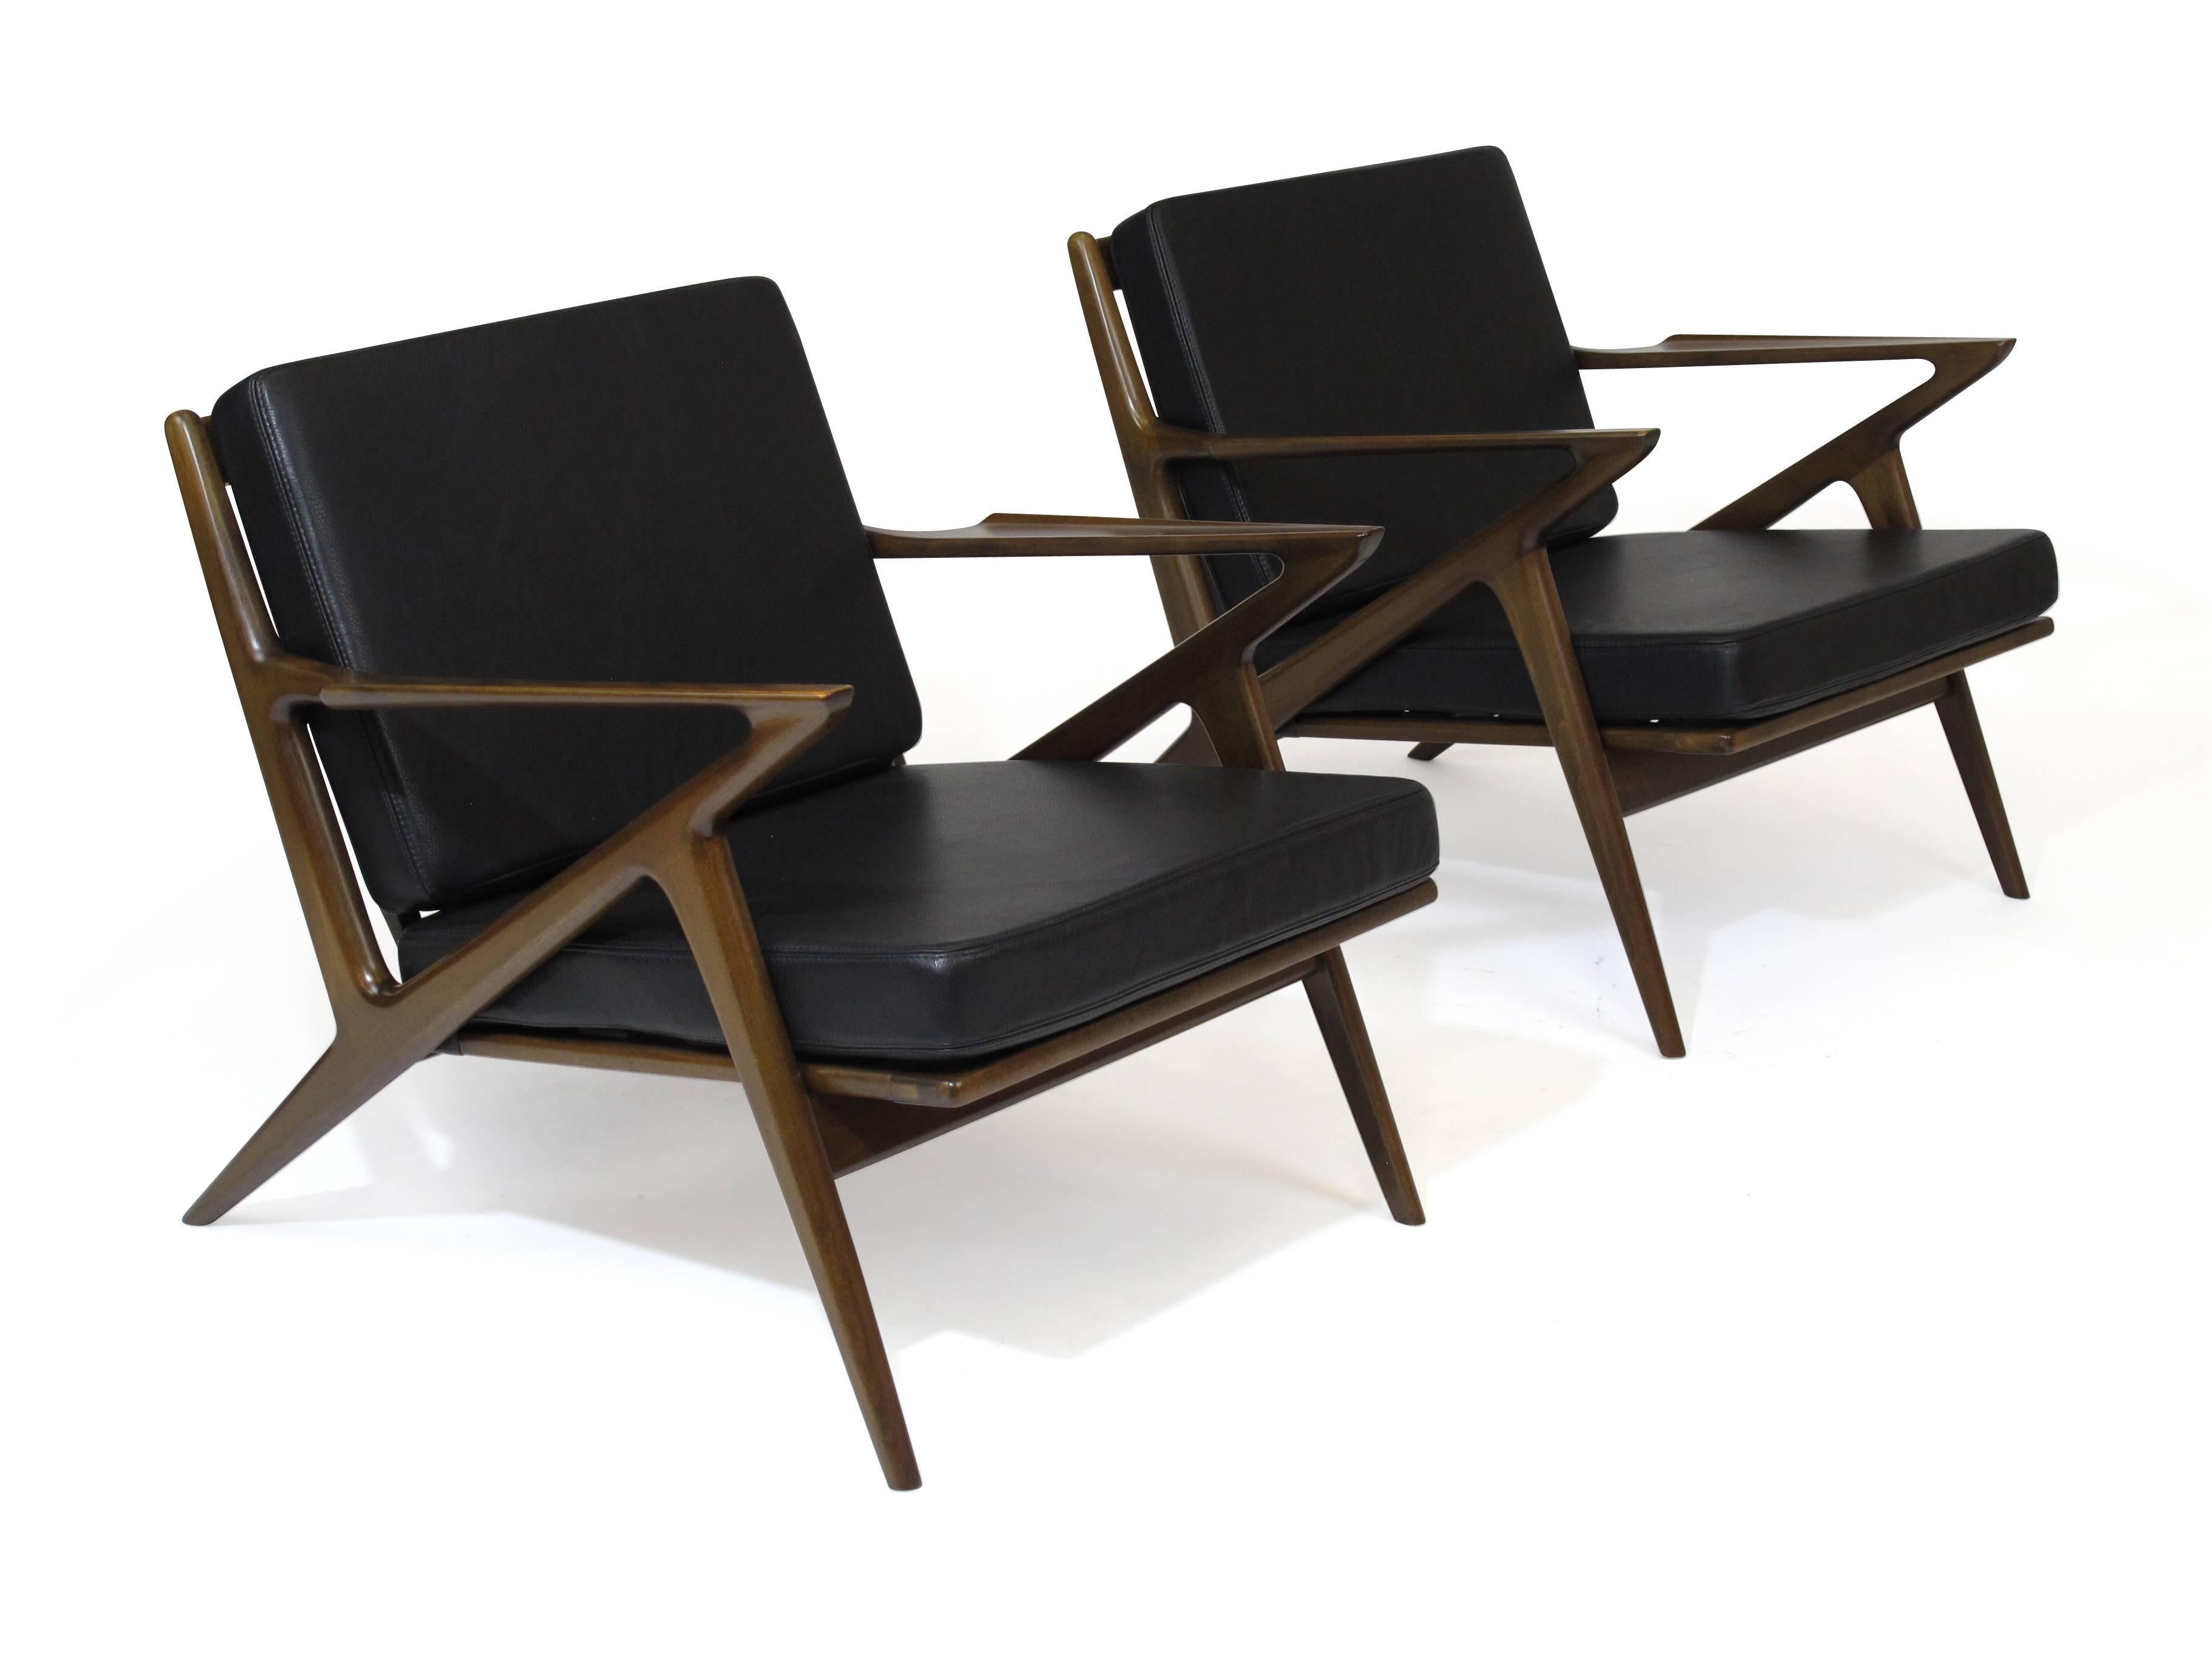 Pair of Selig 'Z' lounges design by Poul Jensen. Walnut stained beechwood, original wood finished cleaned and polished, with newly upholstered cushions in black leather over new rubber straps.